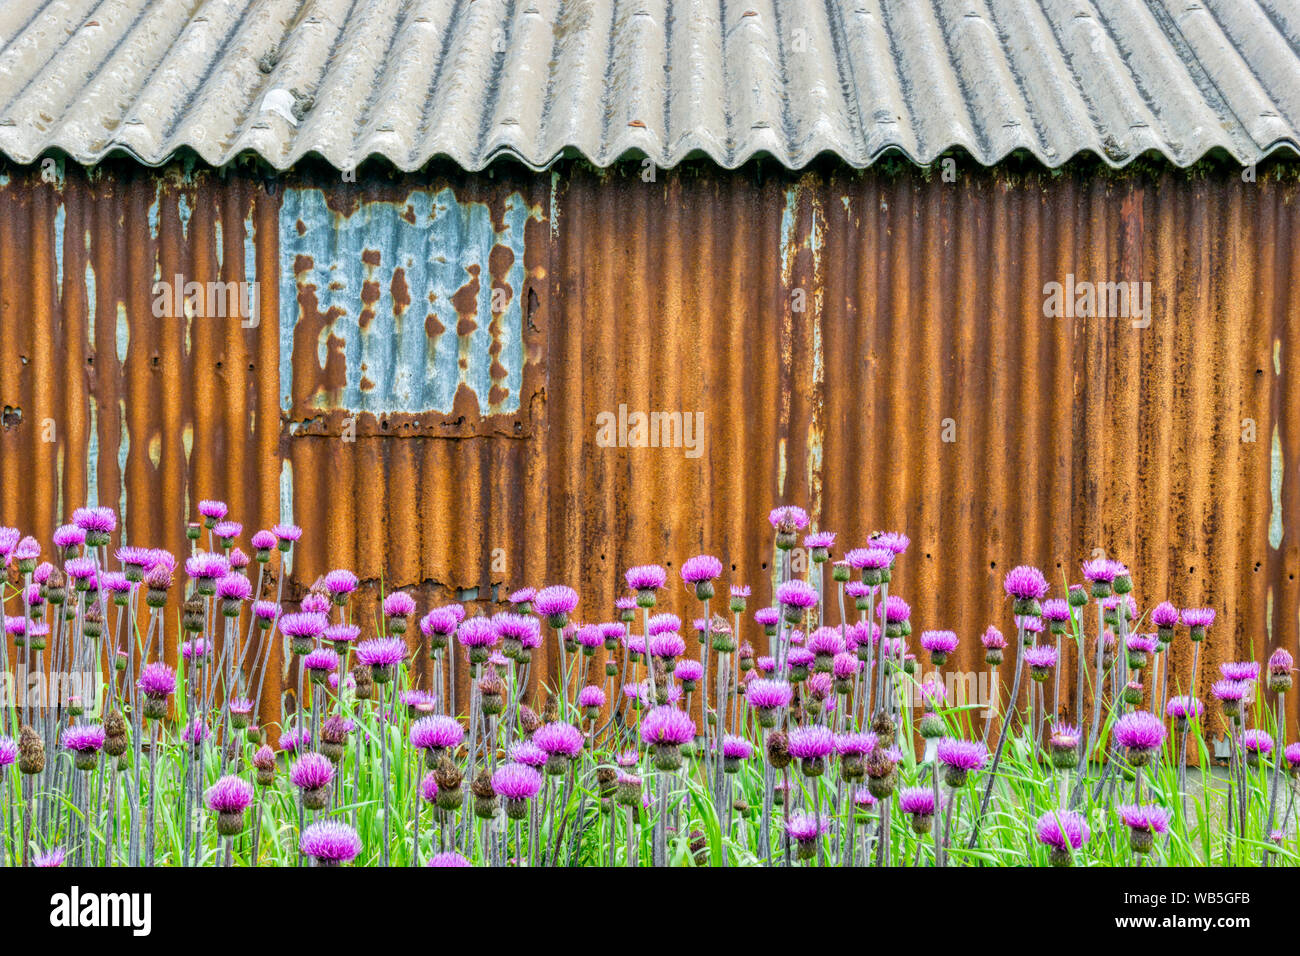 A field of thistles in front of an old rusty corrugated iron building. Stock Photo